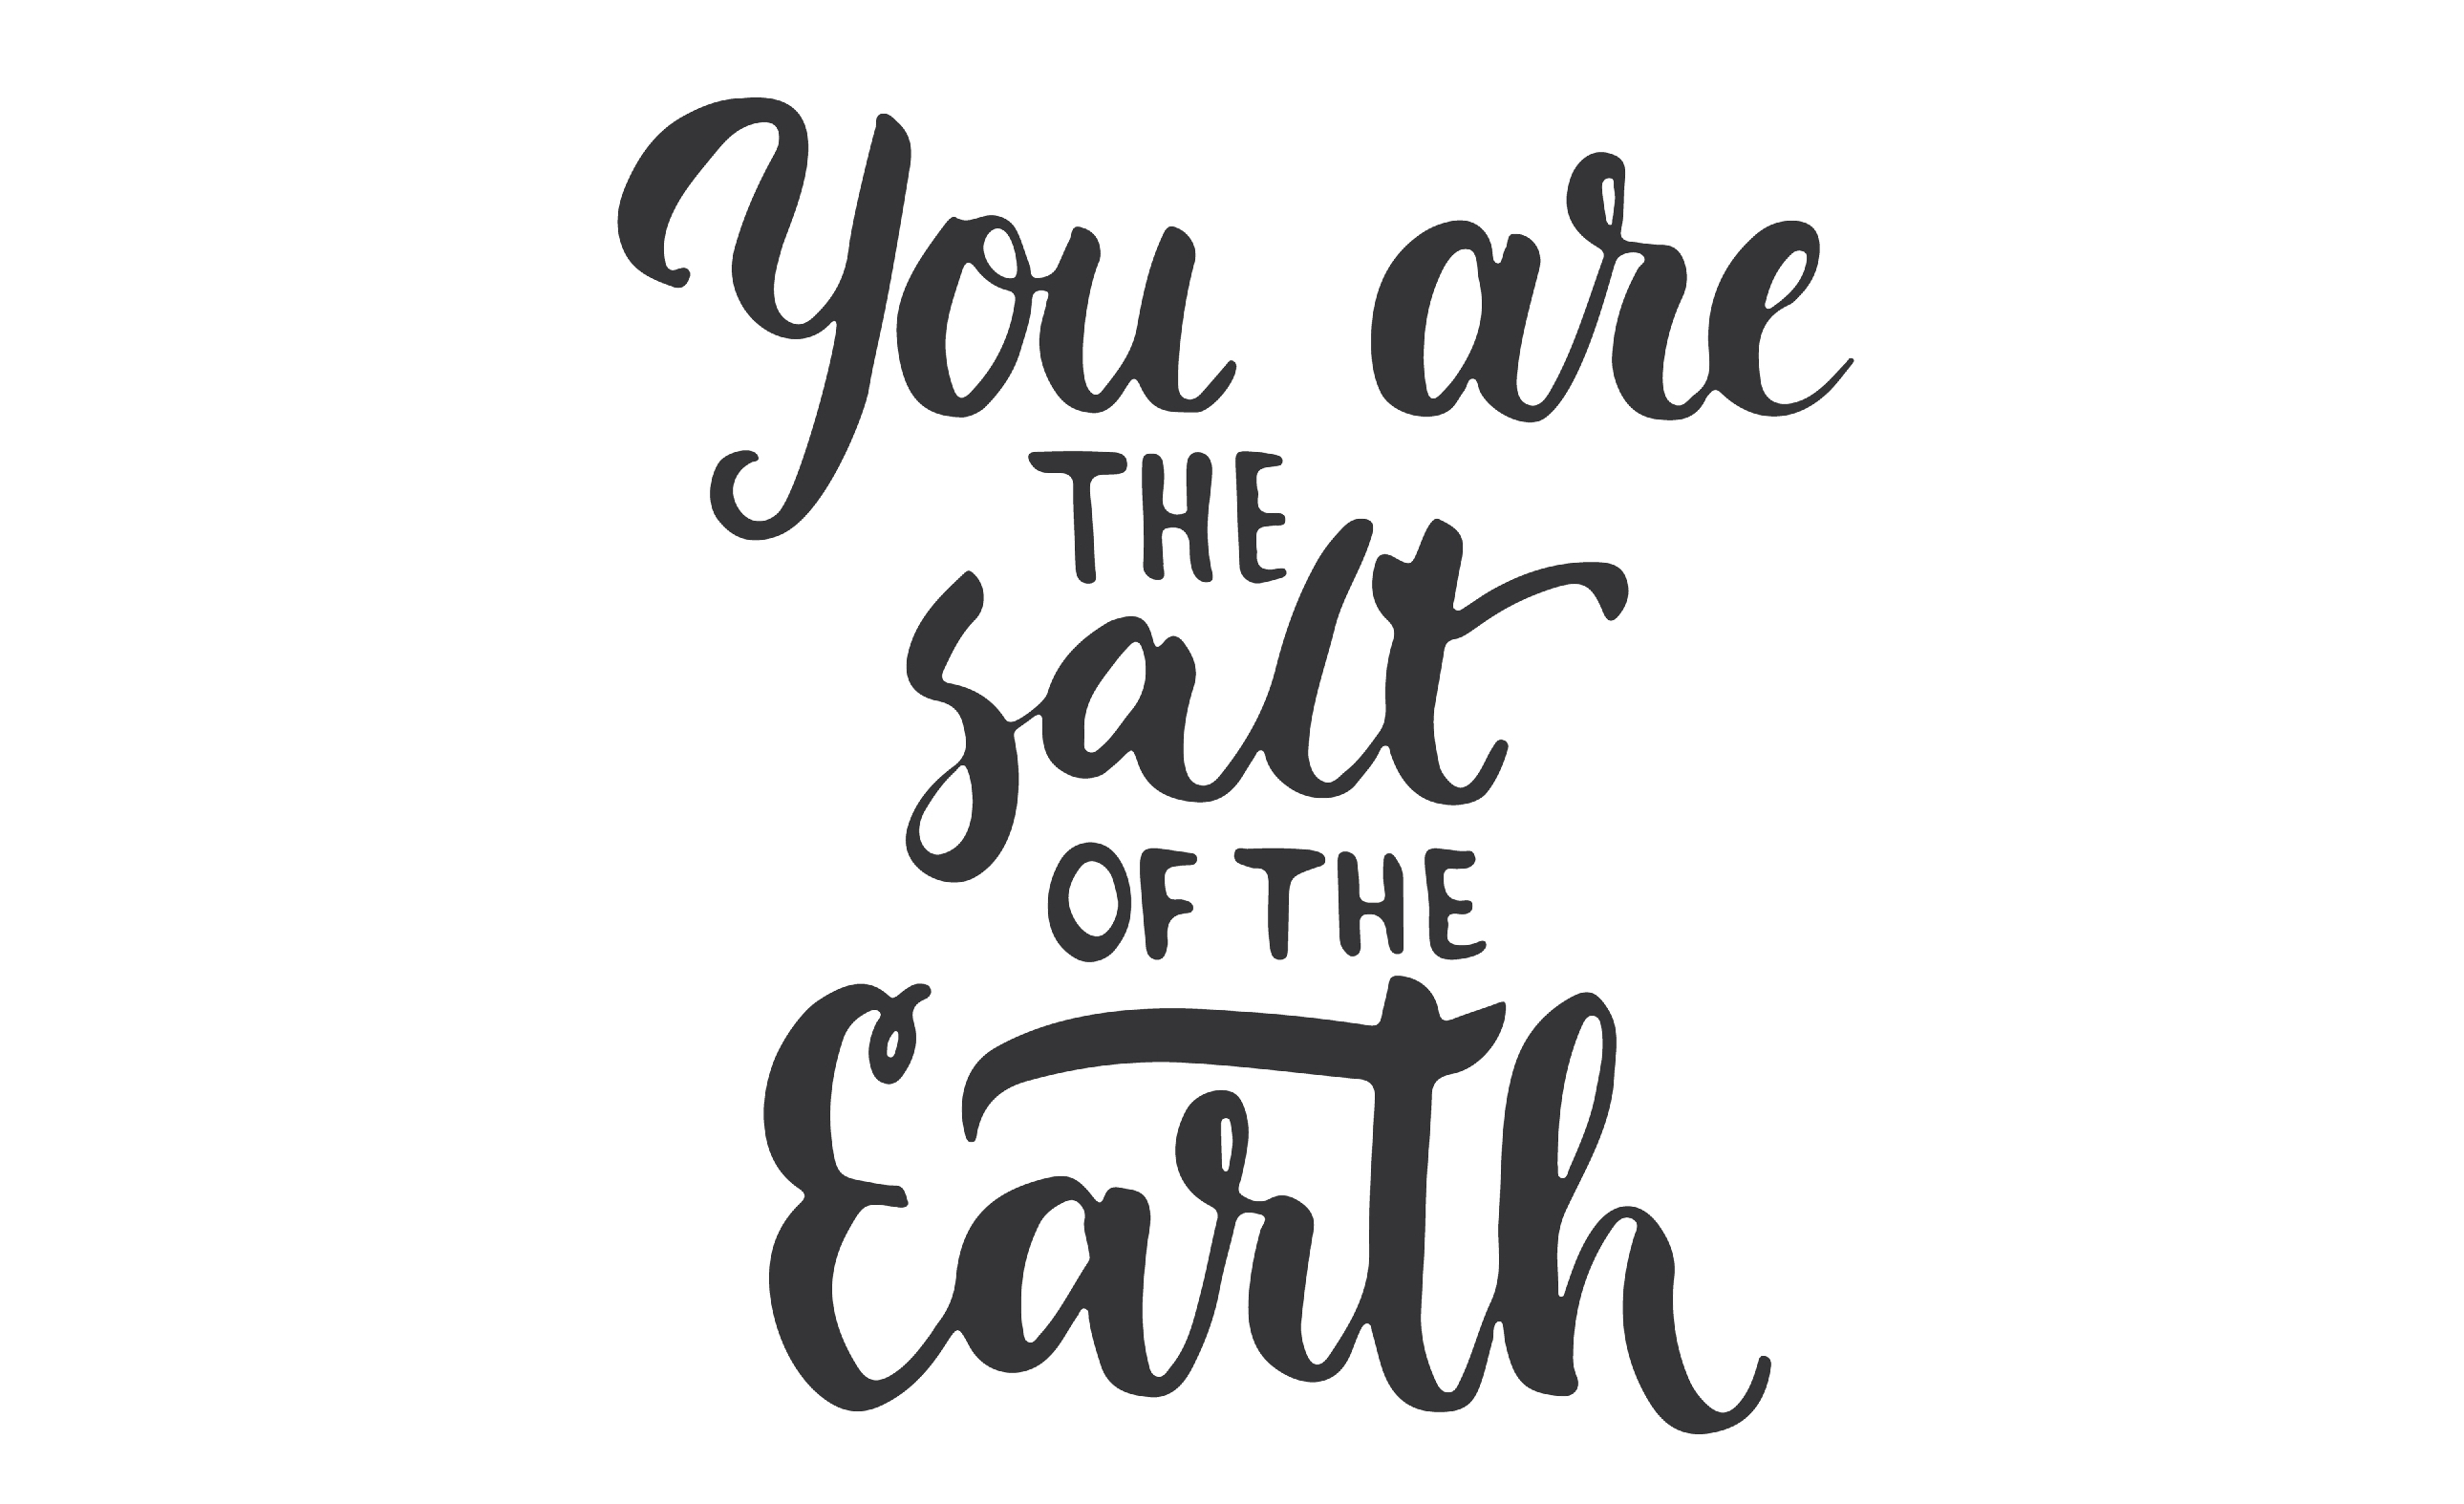 Are You The Salt Of The Earth?